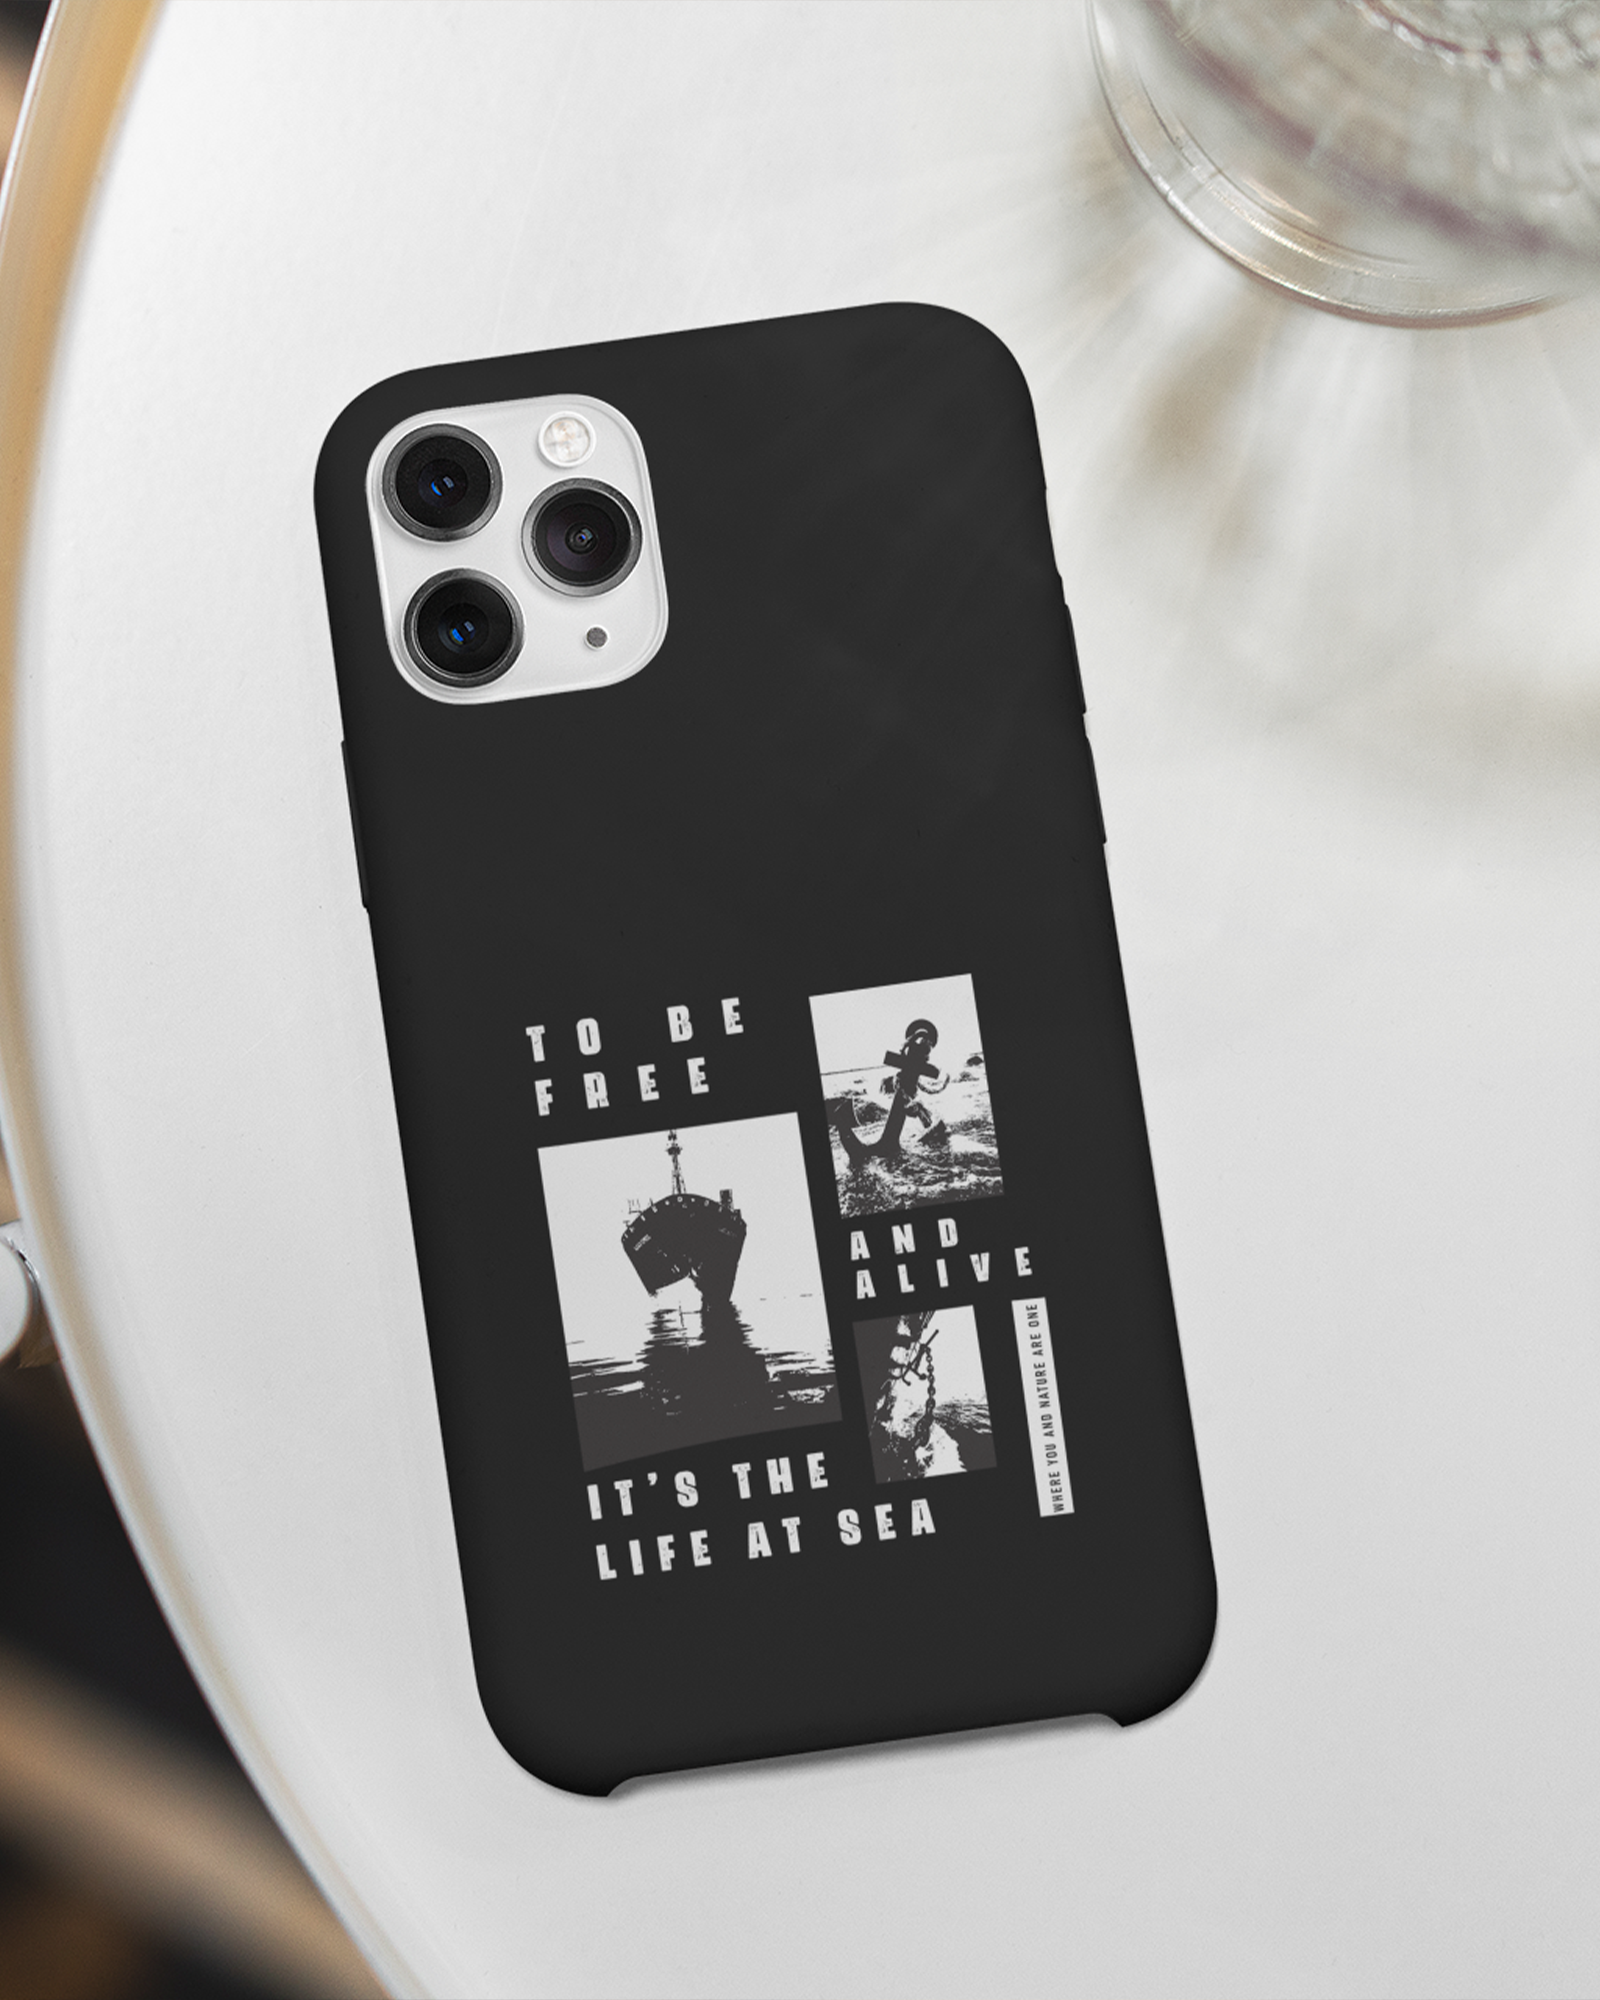 To Be Free And Alive It's The Life At Sea Phone Cover